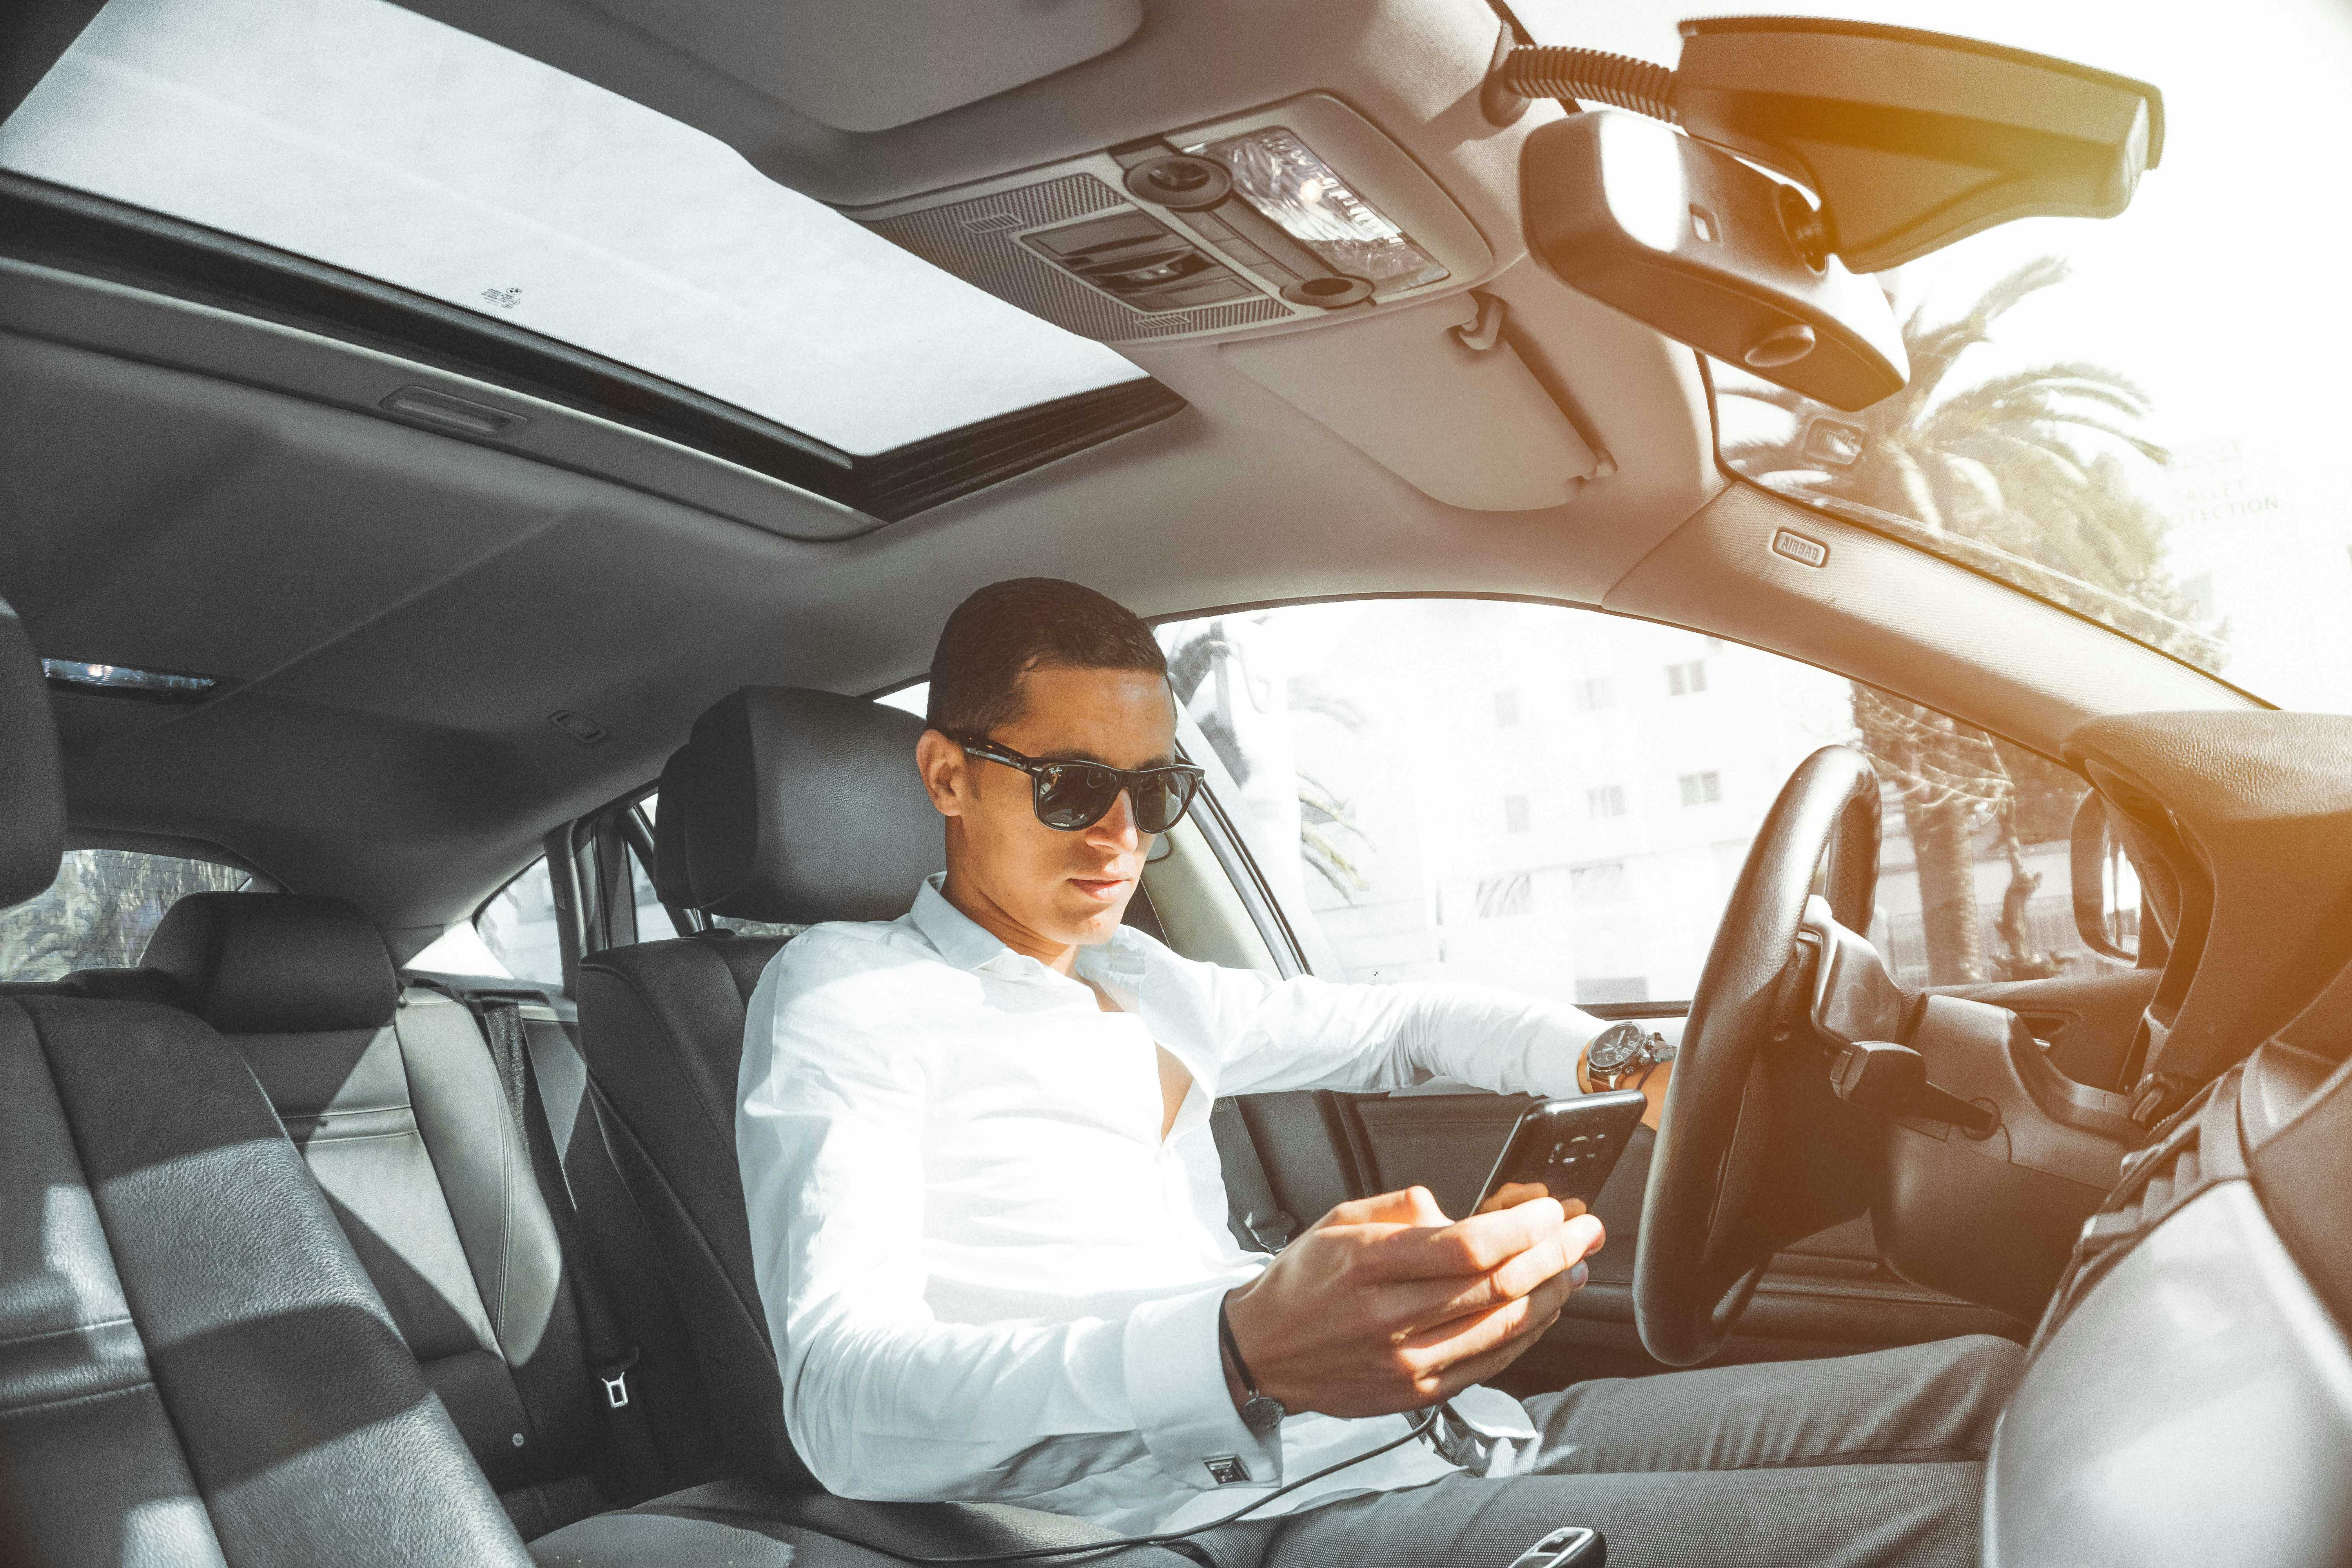 Inside the car, a man holds his smartphone. | Photo: Pexels